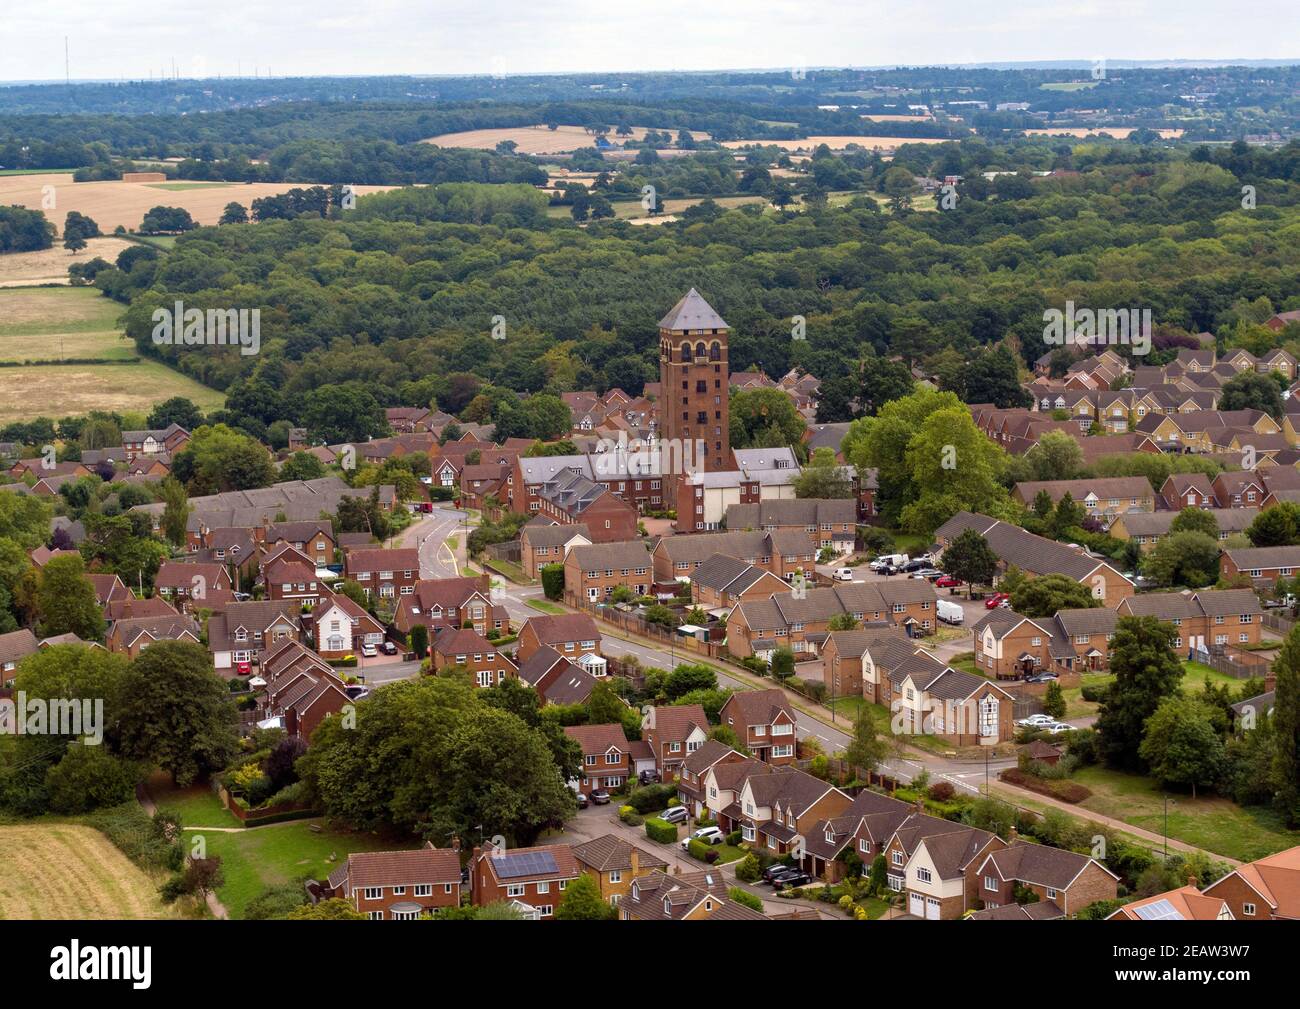 A general view of Shenley Tower in Radlett, Hertfordshire.. Stock Photo